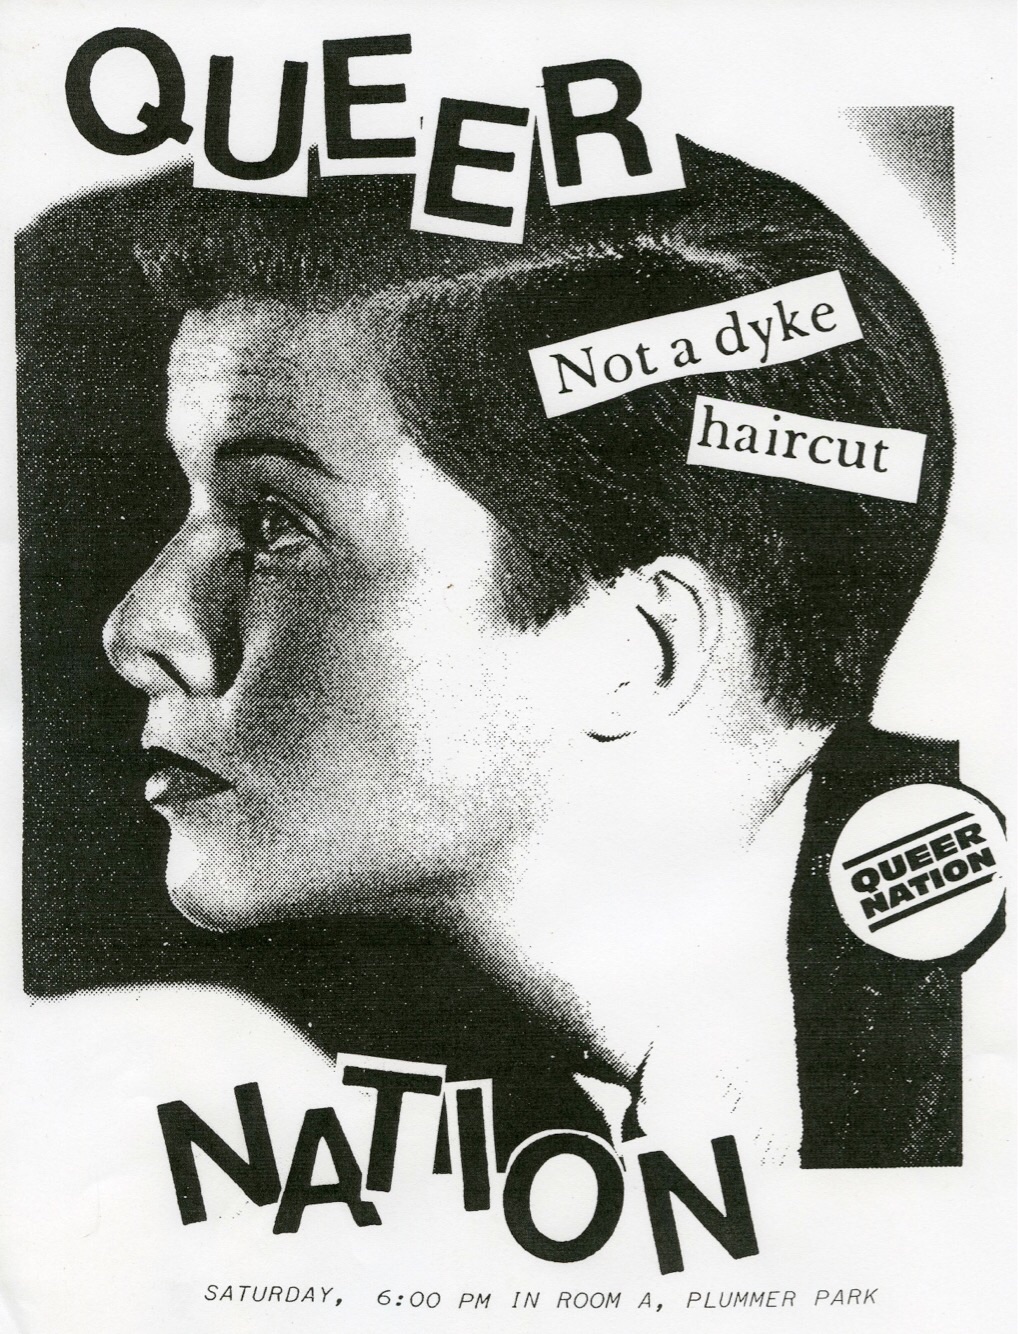 A zine-style poster of a woman in profile with short brown hair. The text over her face reads "Queer Nation" and "Not a dyke haircut."